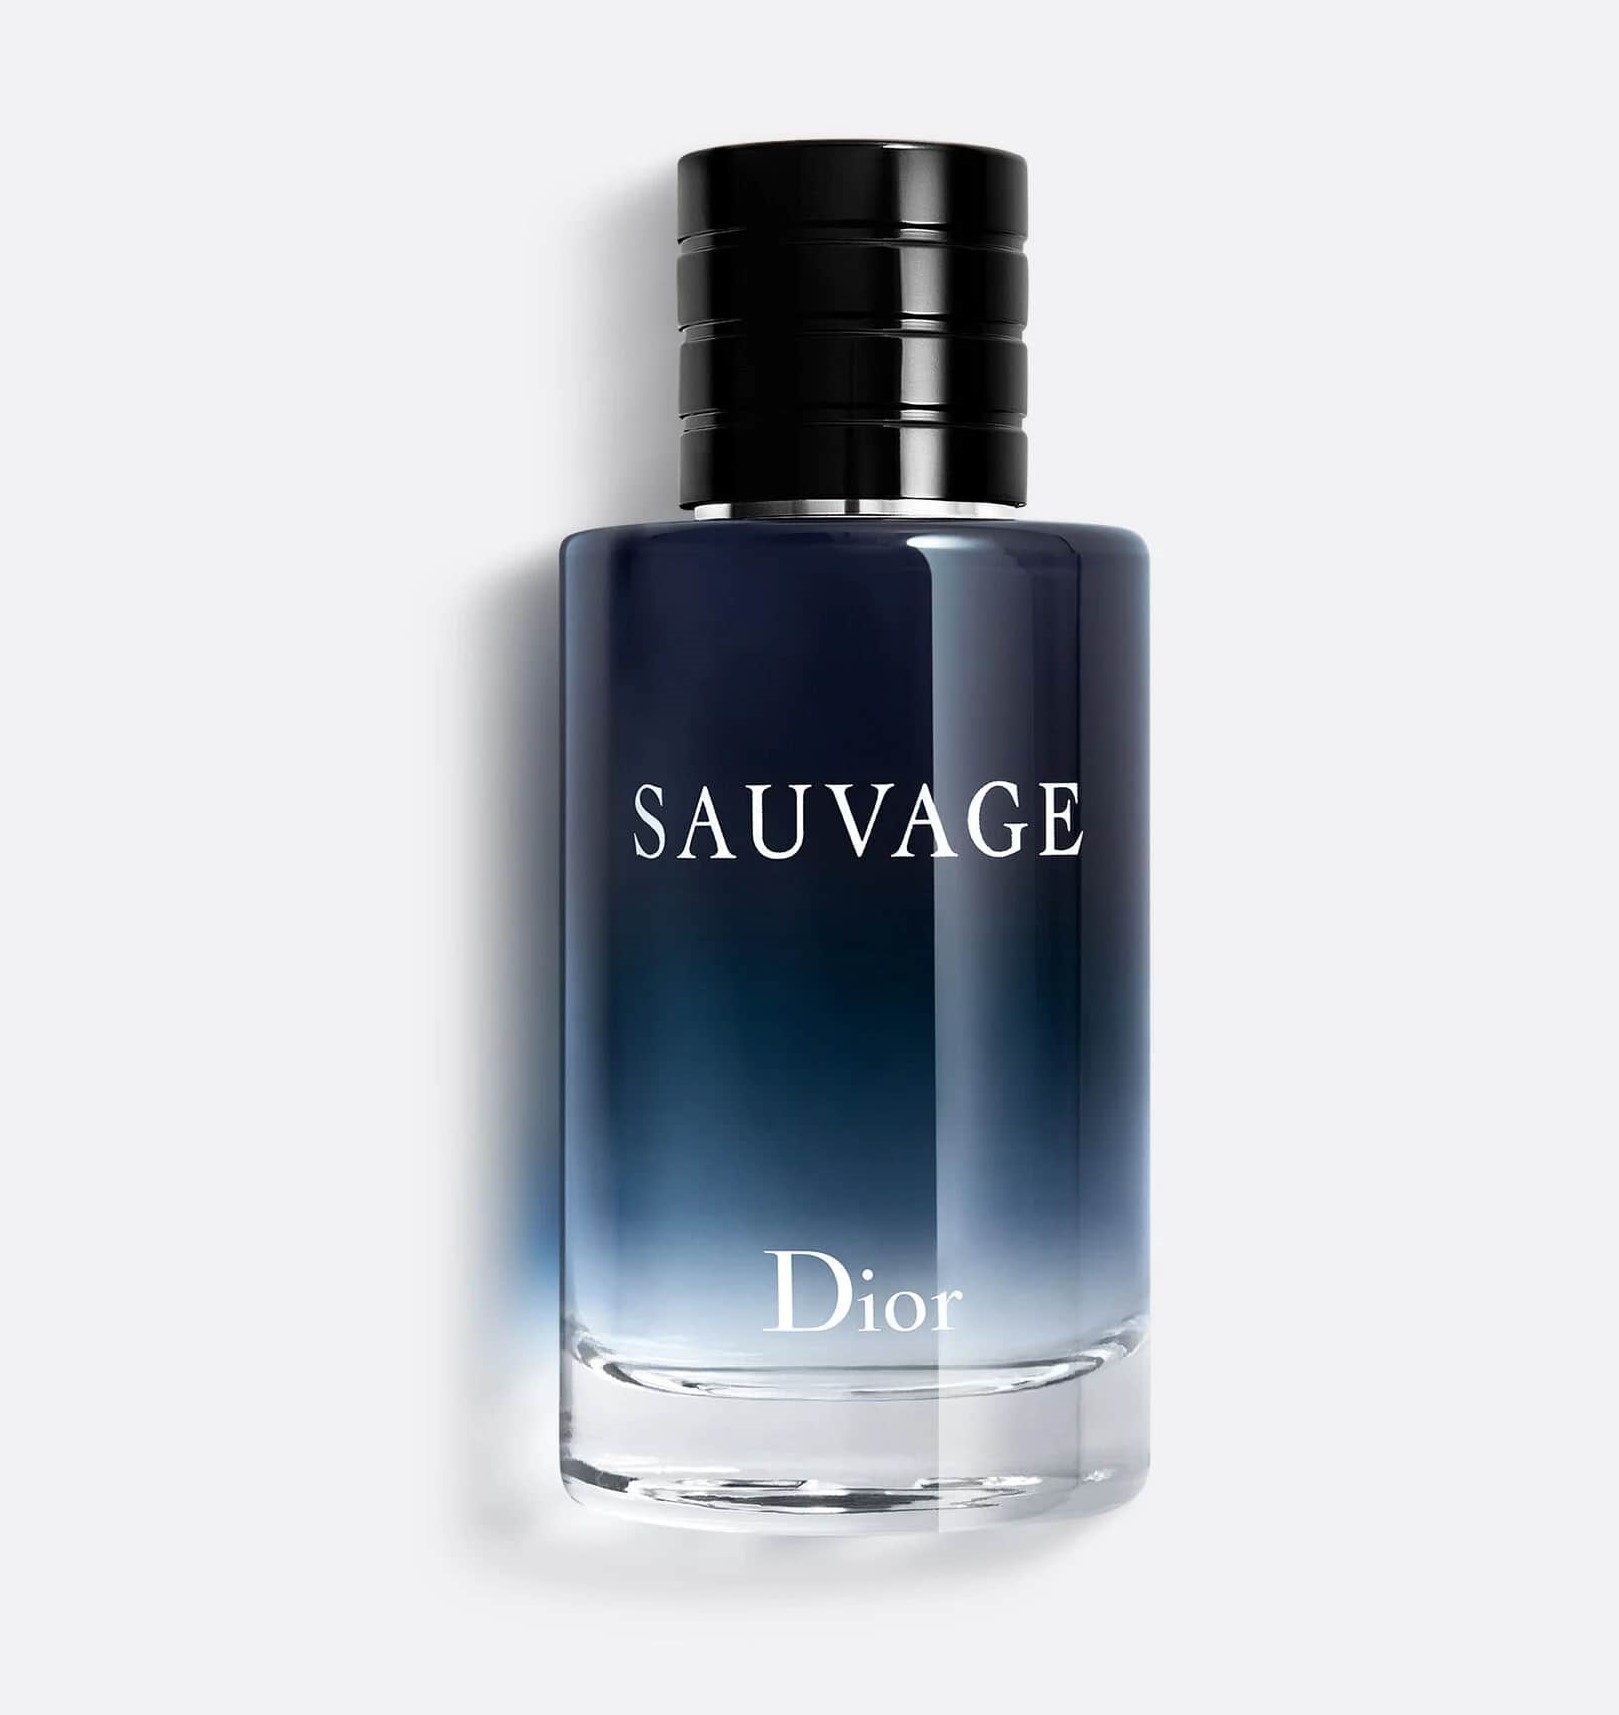 Sauvage EDT Spray Perfume 60ml for Men by Dior